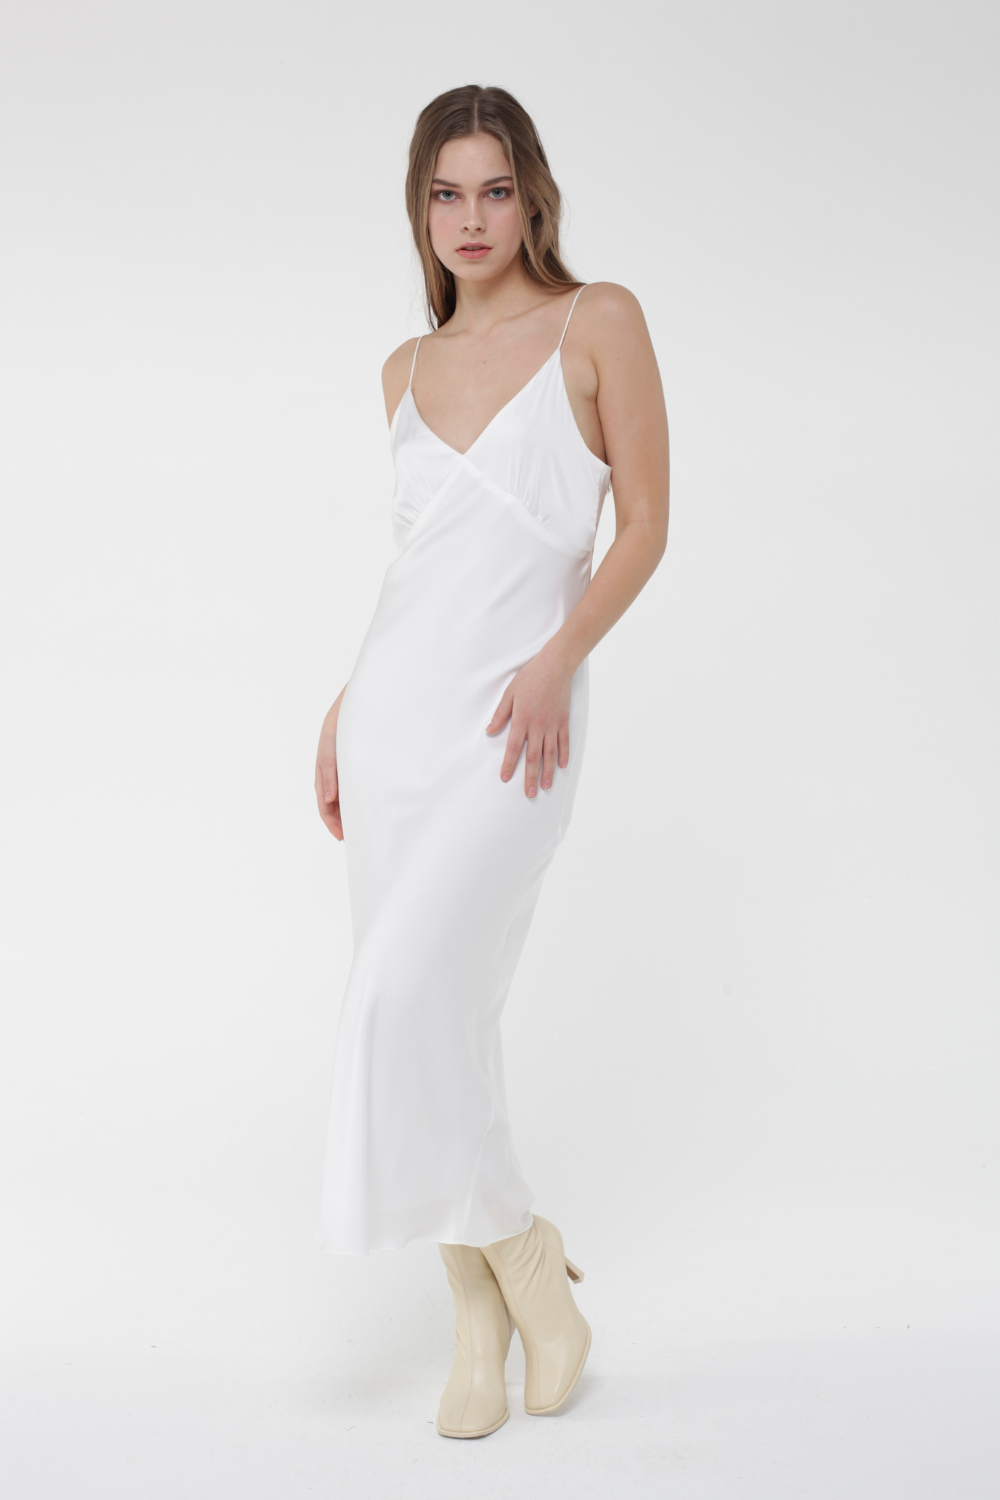 Dress combination with a cup on thin razors, white (MissSecret) DR-040-white